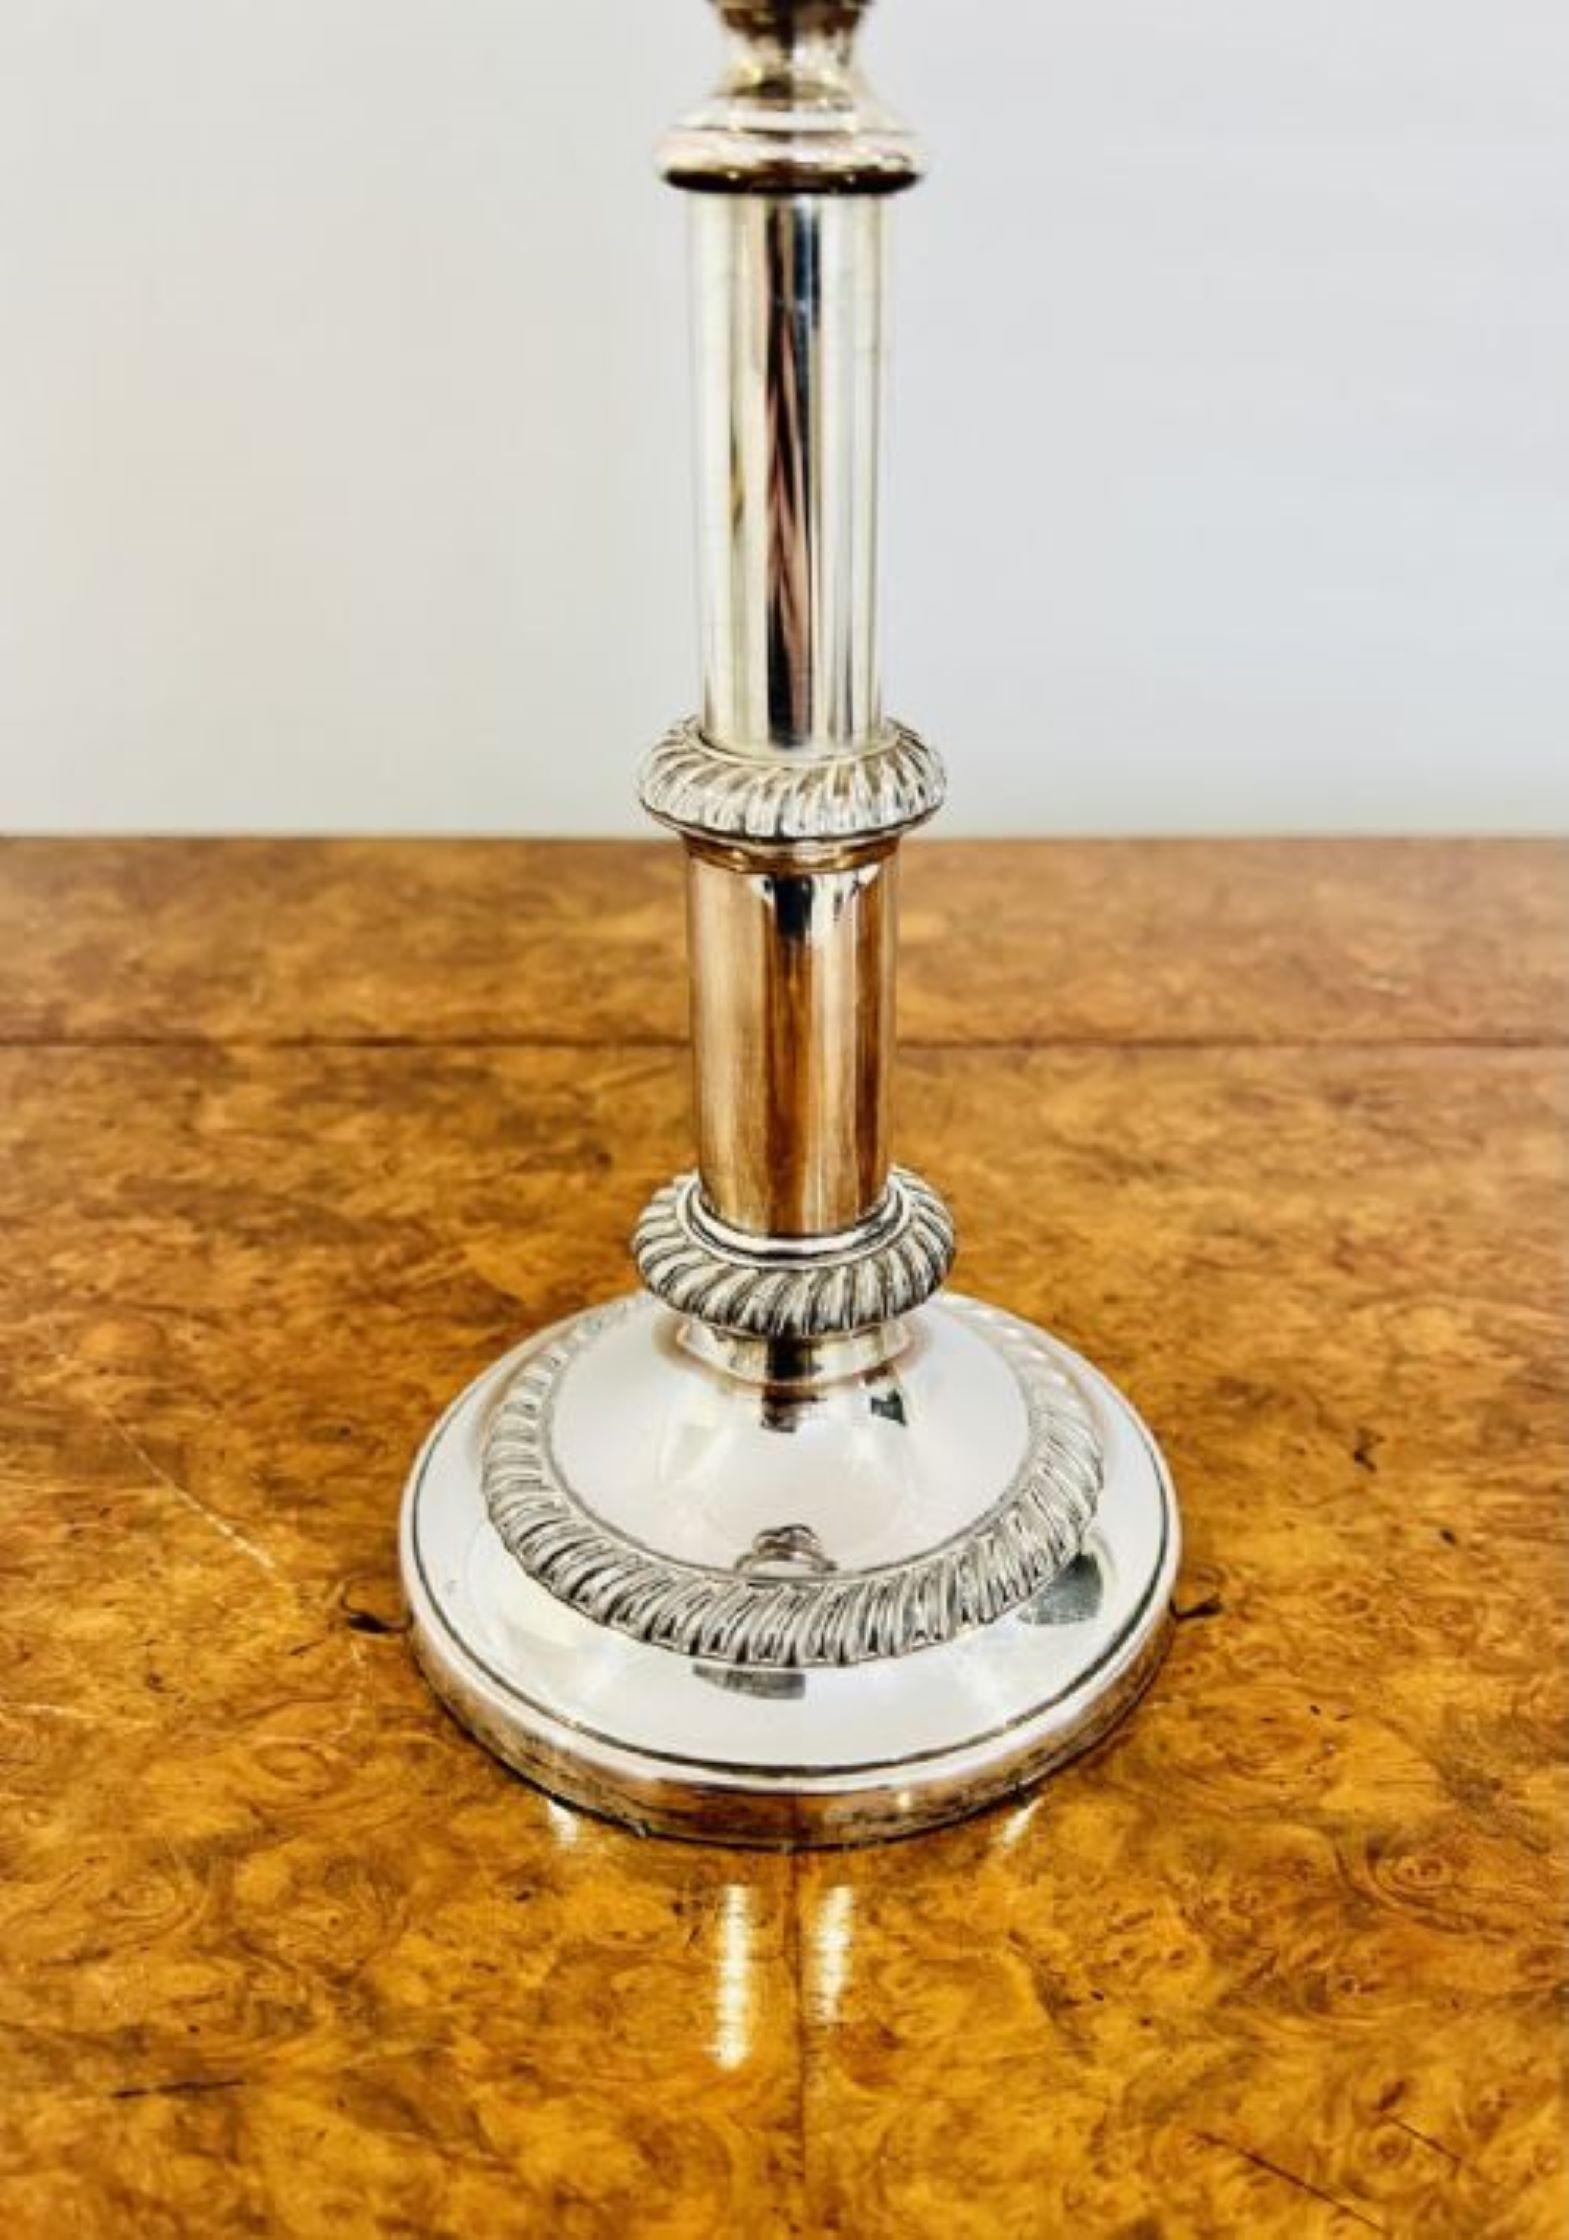 Quality pair of antique Regency telescopic Sheffield plated candlesticks having a quality pair of antique Regency telescopic Sheffield plated candlesticks with an ornate turned column on a circular stepped base. 

D. 1830